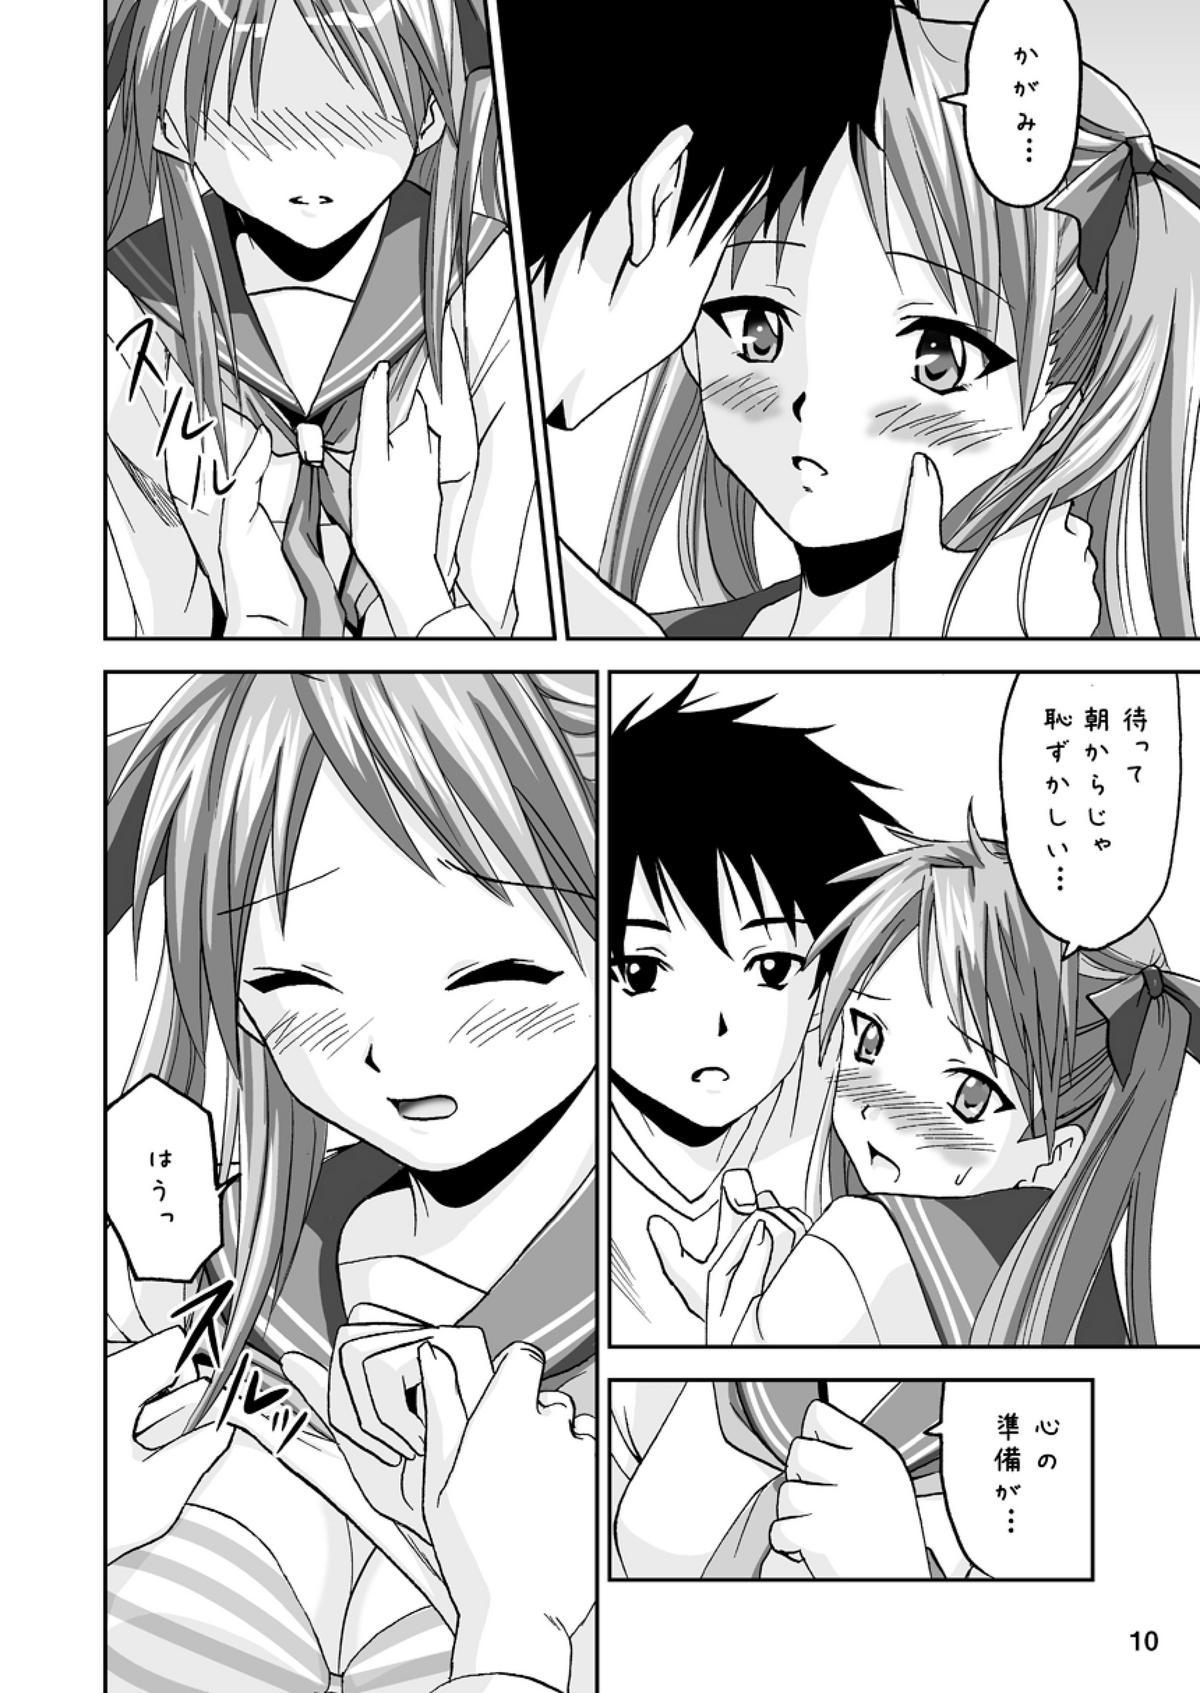 Peituda Kagami DereDere After - Lucky star Show - Page 9